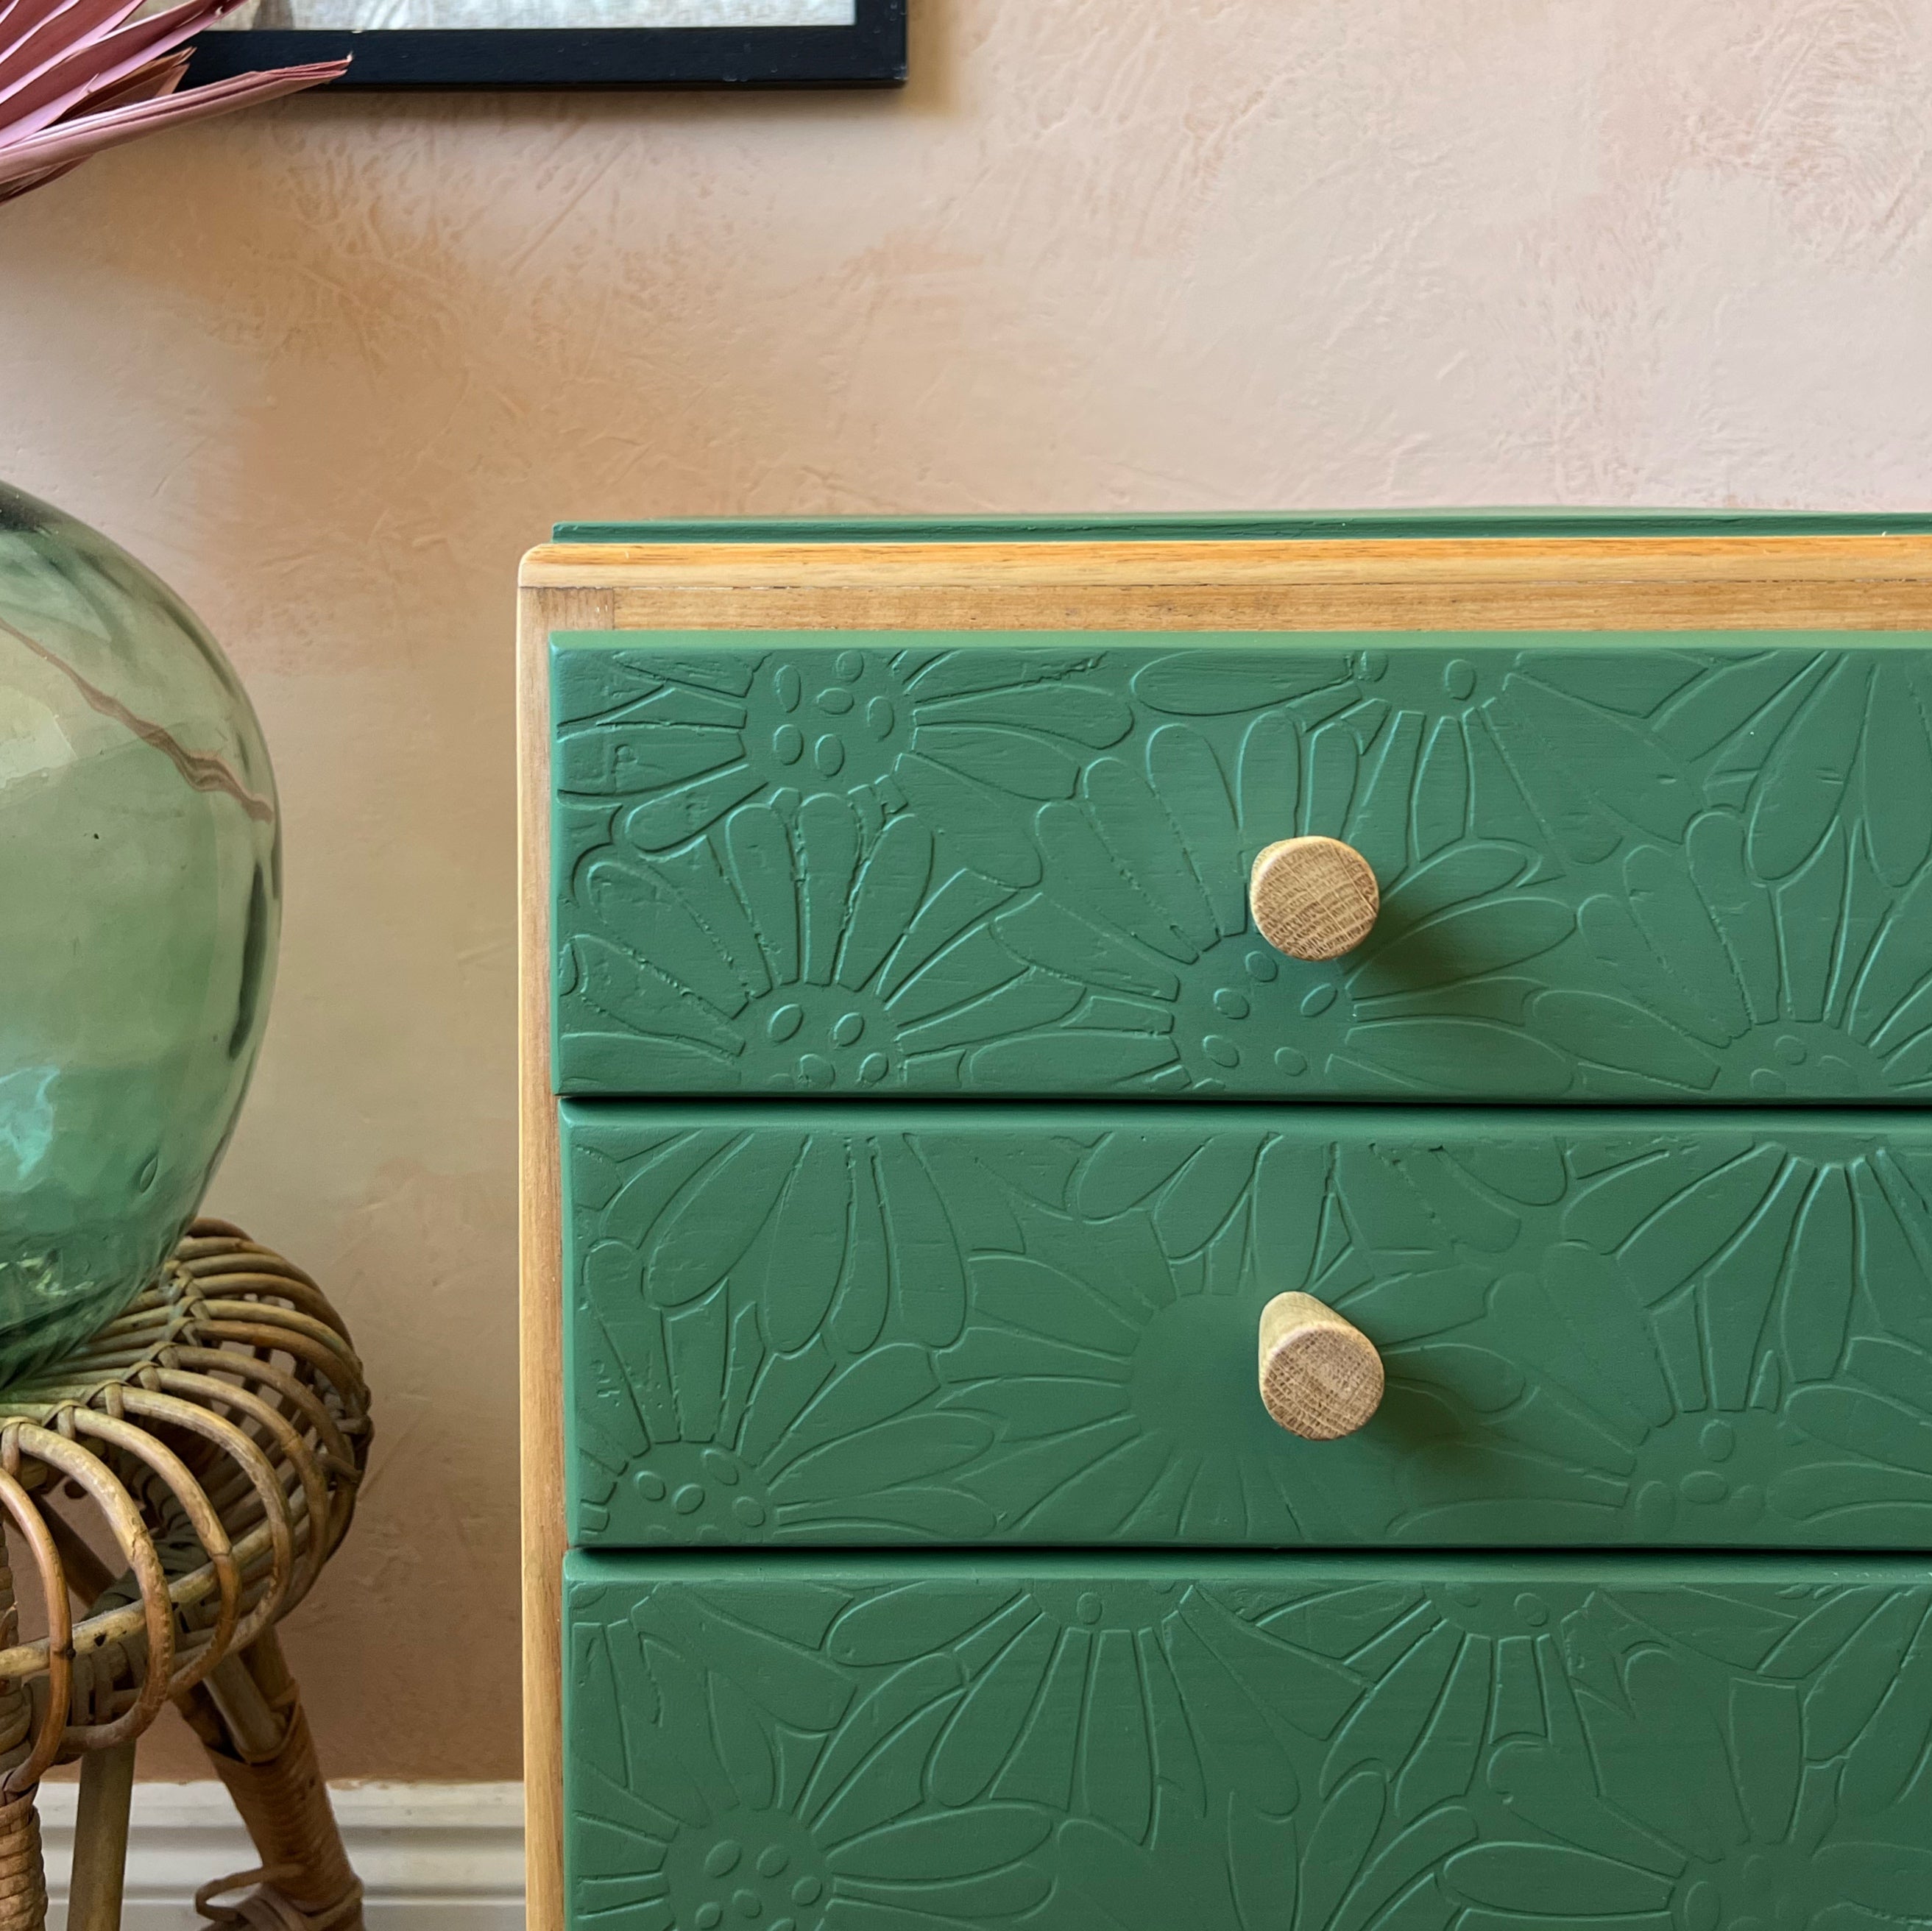 Retro side table painted green